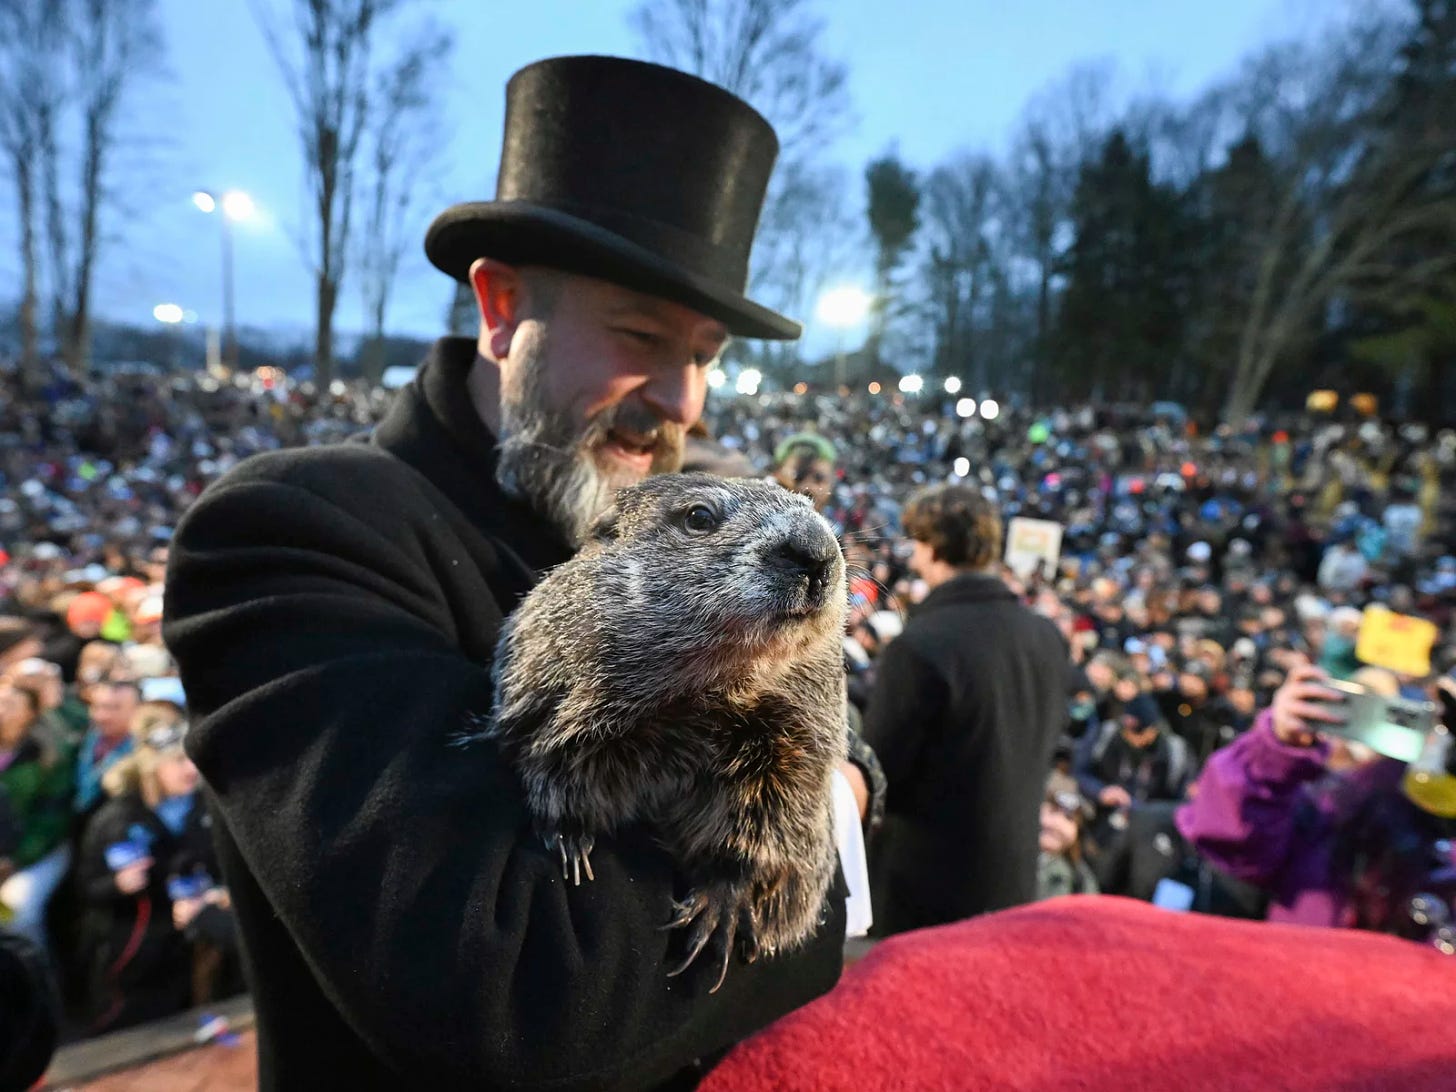 The groundhog being held by a man in a black coat and top hat